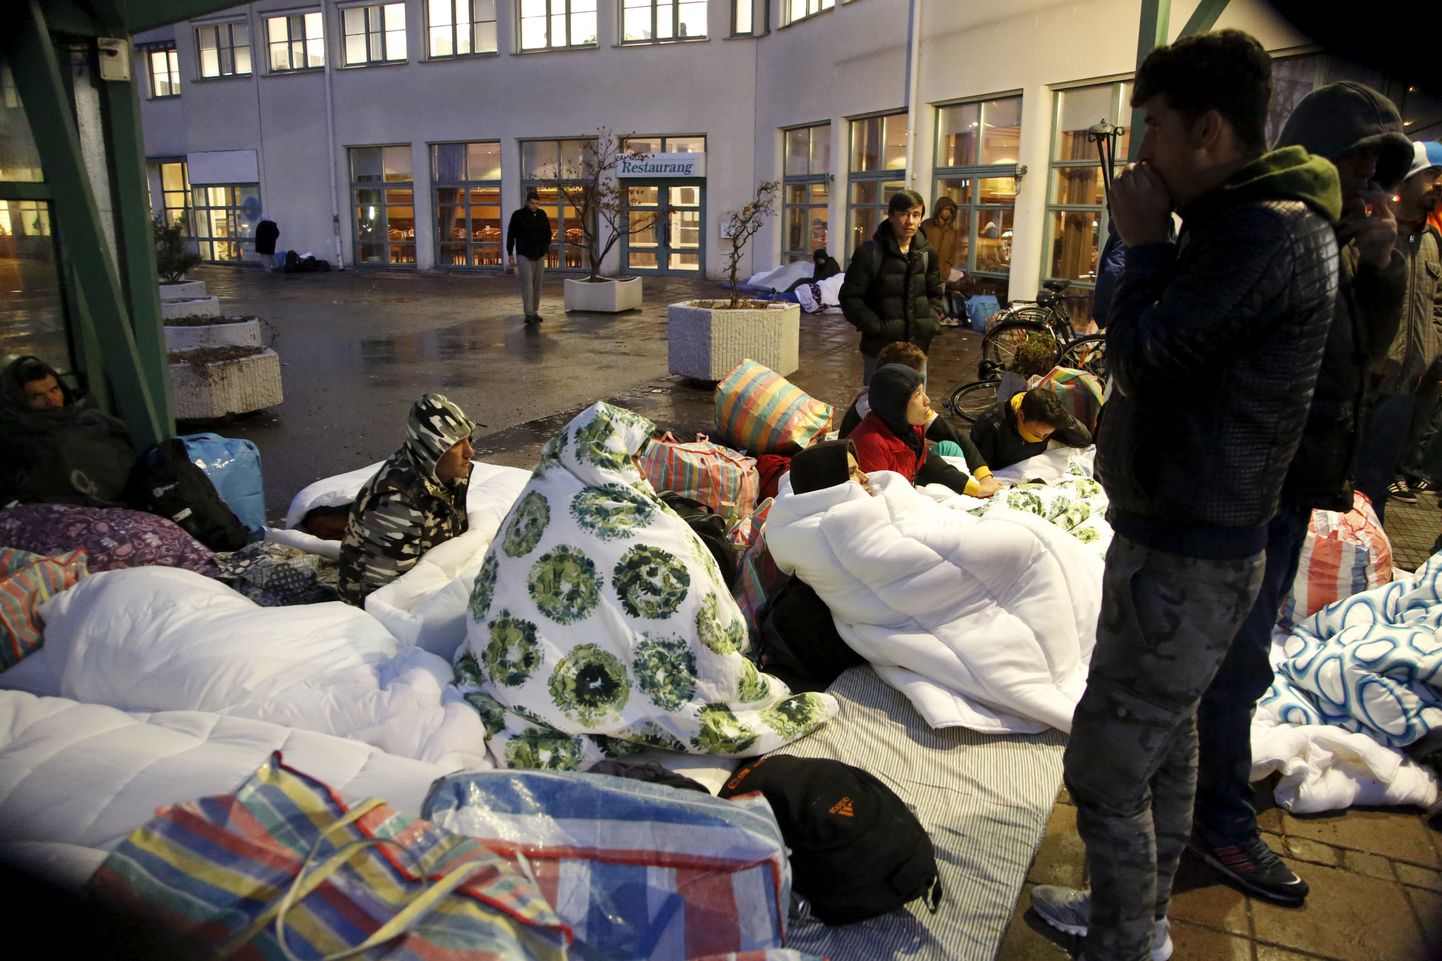 Refugees sleep outside the entrance of the Swedish Migration Agency's arrival center for asylum seekers at Jagersro in Malmo, Sweden, November 20, 2015. Sweden, a favourite destination for refugees flooding into Europe, can no longer house all those arriving and many will have to find their own accommodation, the country's migration agency said on Thursday. Sweden has already imposed temporary border controls in response to the record influx of refugees, while authorities plan to shelter thousands of people in heated tents as well as venues such as ski resorts and a theme park. REUTERS/Stig-Ake Jonsson/TT News Agency    ATTENTION EDITORS - THIS IMAGE WAS PROVIDED BY A THIRD PARTY. FOR EDITORIAL USE ONLY. NOT FOR SALE FOR MARKETING OR ADVERTISING CAMPAIGNS. THIS PICTURE IS DISTRIBUTED EXACTLY AS RECEIVED BY REUTERS, AS A SERVICE TO CLIENTS. SWEDEN OUT. NO COMMERCIAL OR EDITORIAL SALES IN SWEDEN. NO COMMERCIAL SALES.